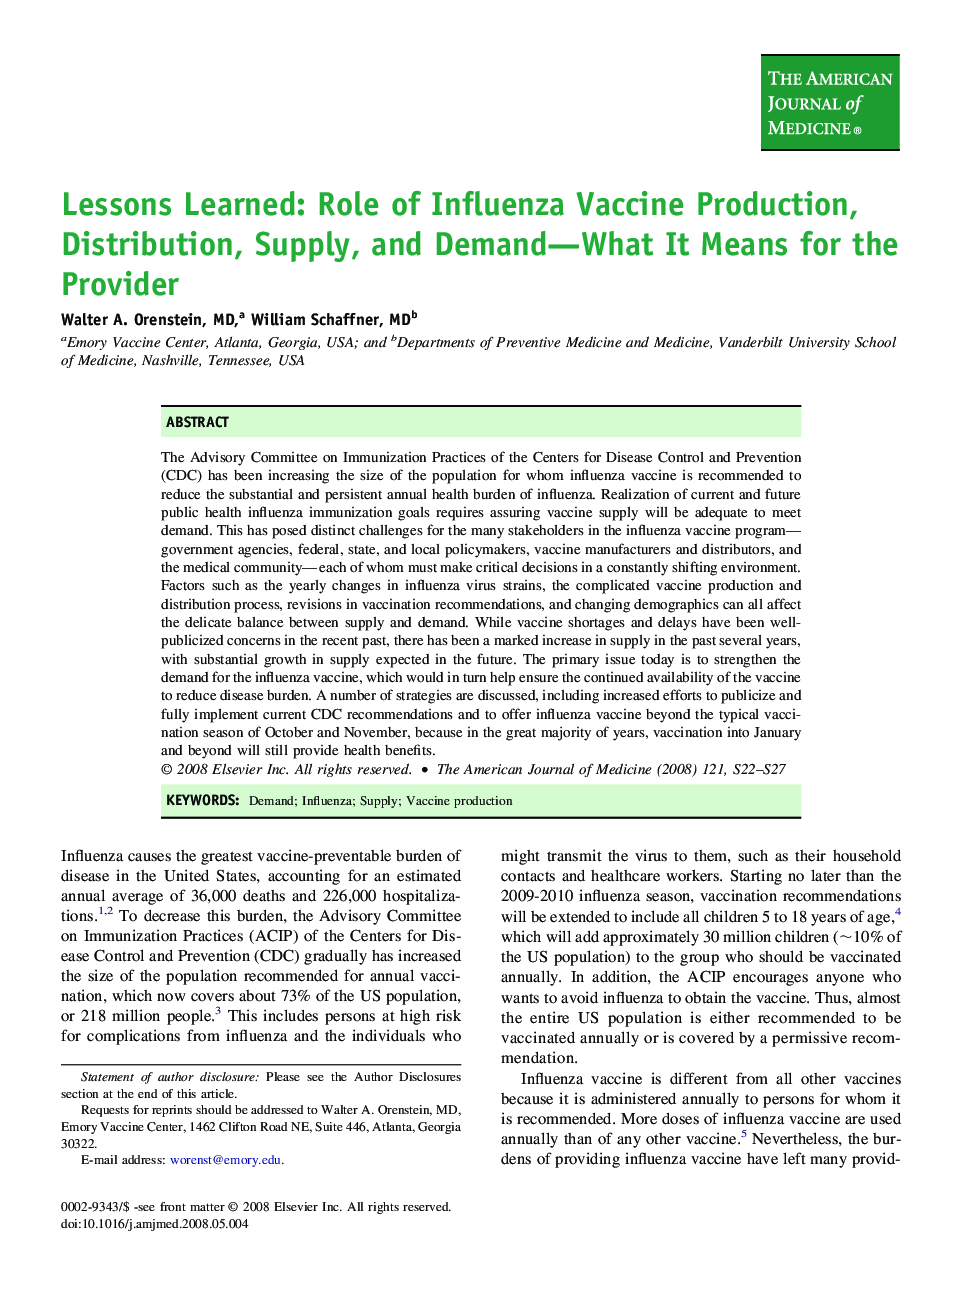 Lessons Learned: Role of Influenza Vaccine Production, Distribution, Supply, and Demand—What It Means for the Provider 